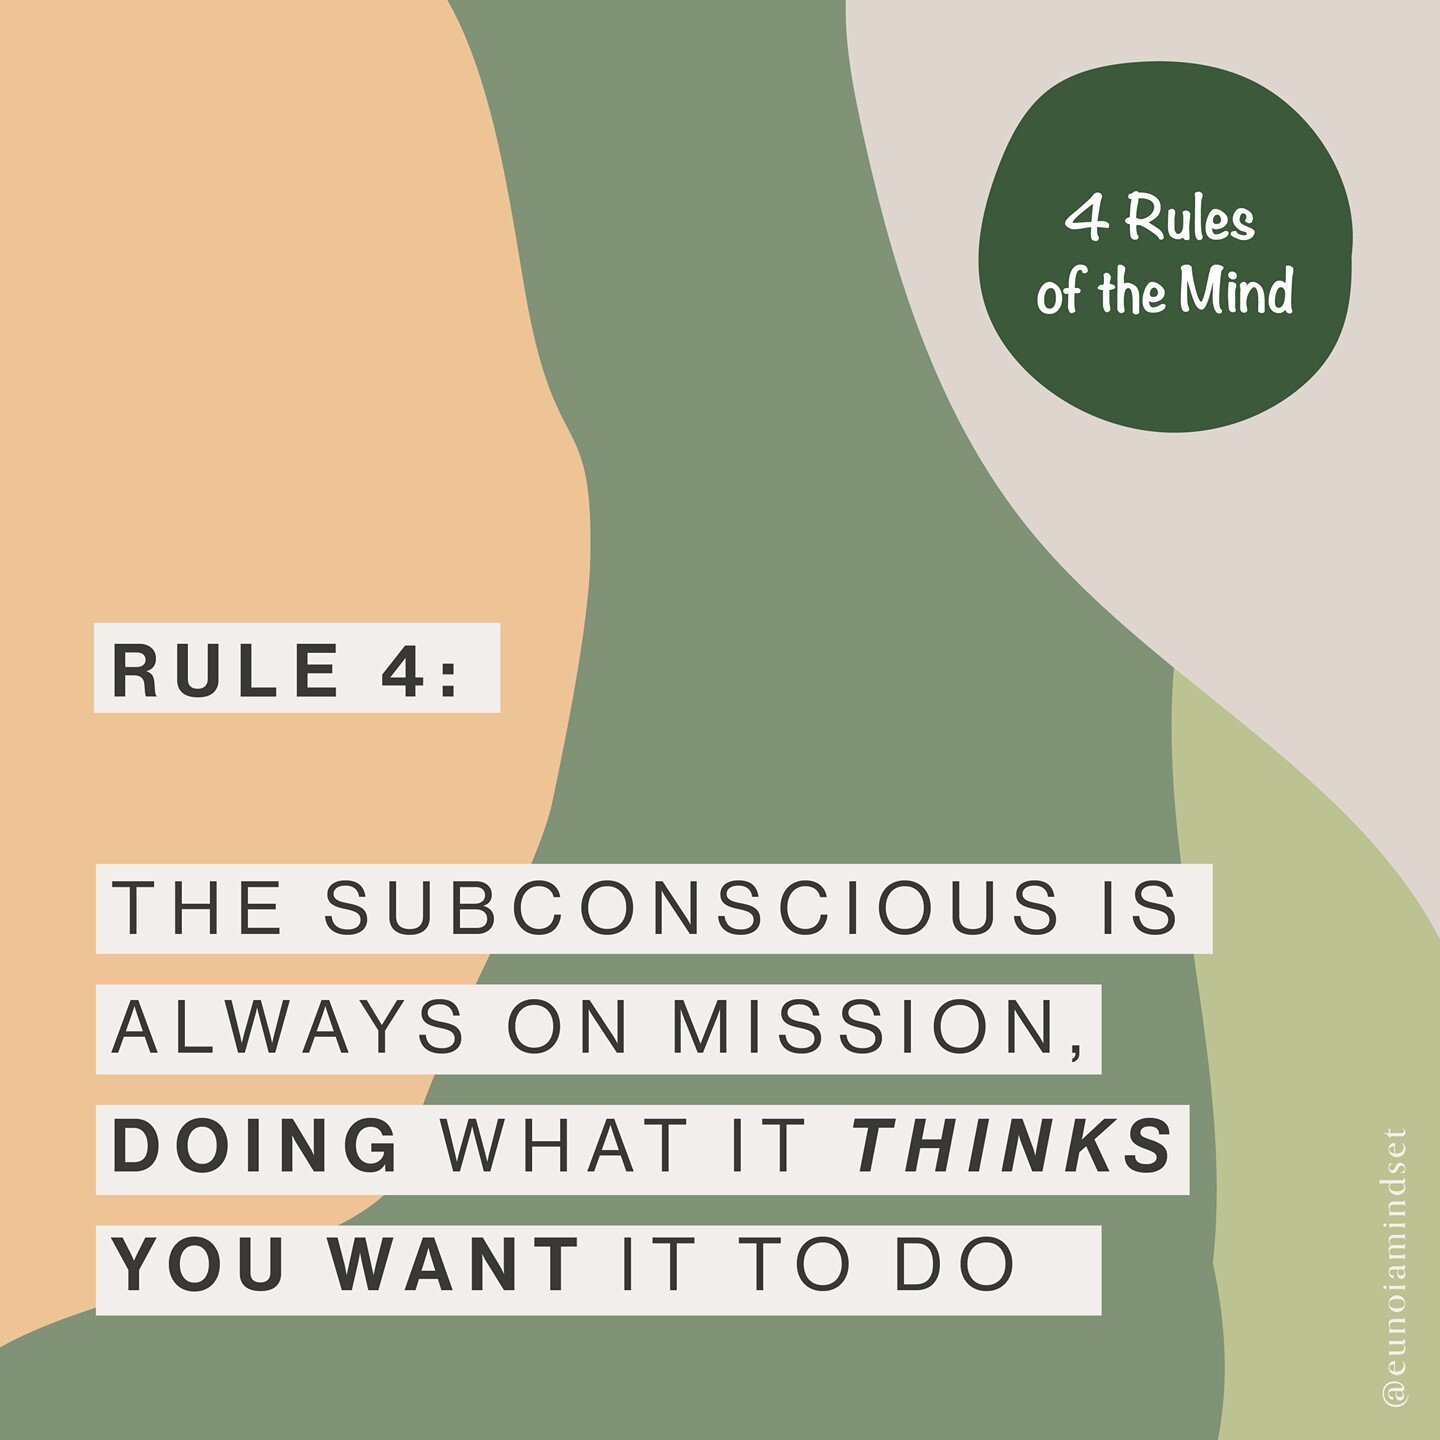 RULE 4: 
YOUR SUBSCONSCIOUS IS ALWAYS ON MISSION

To understand this rule, you may want to bring to your mind an image of a soldier, whose purpose is driven by the mission on hand. 

Their needs and wants come second, to the mission. 
The mission, dr